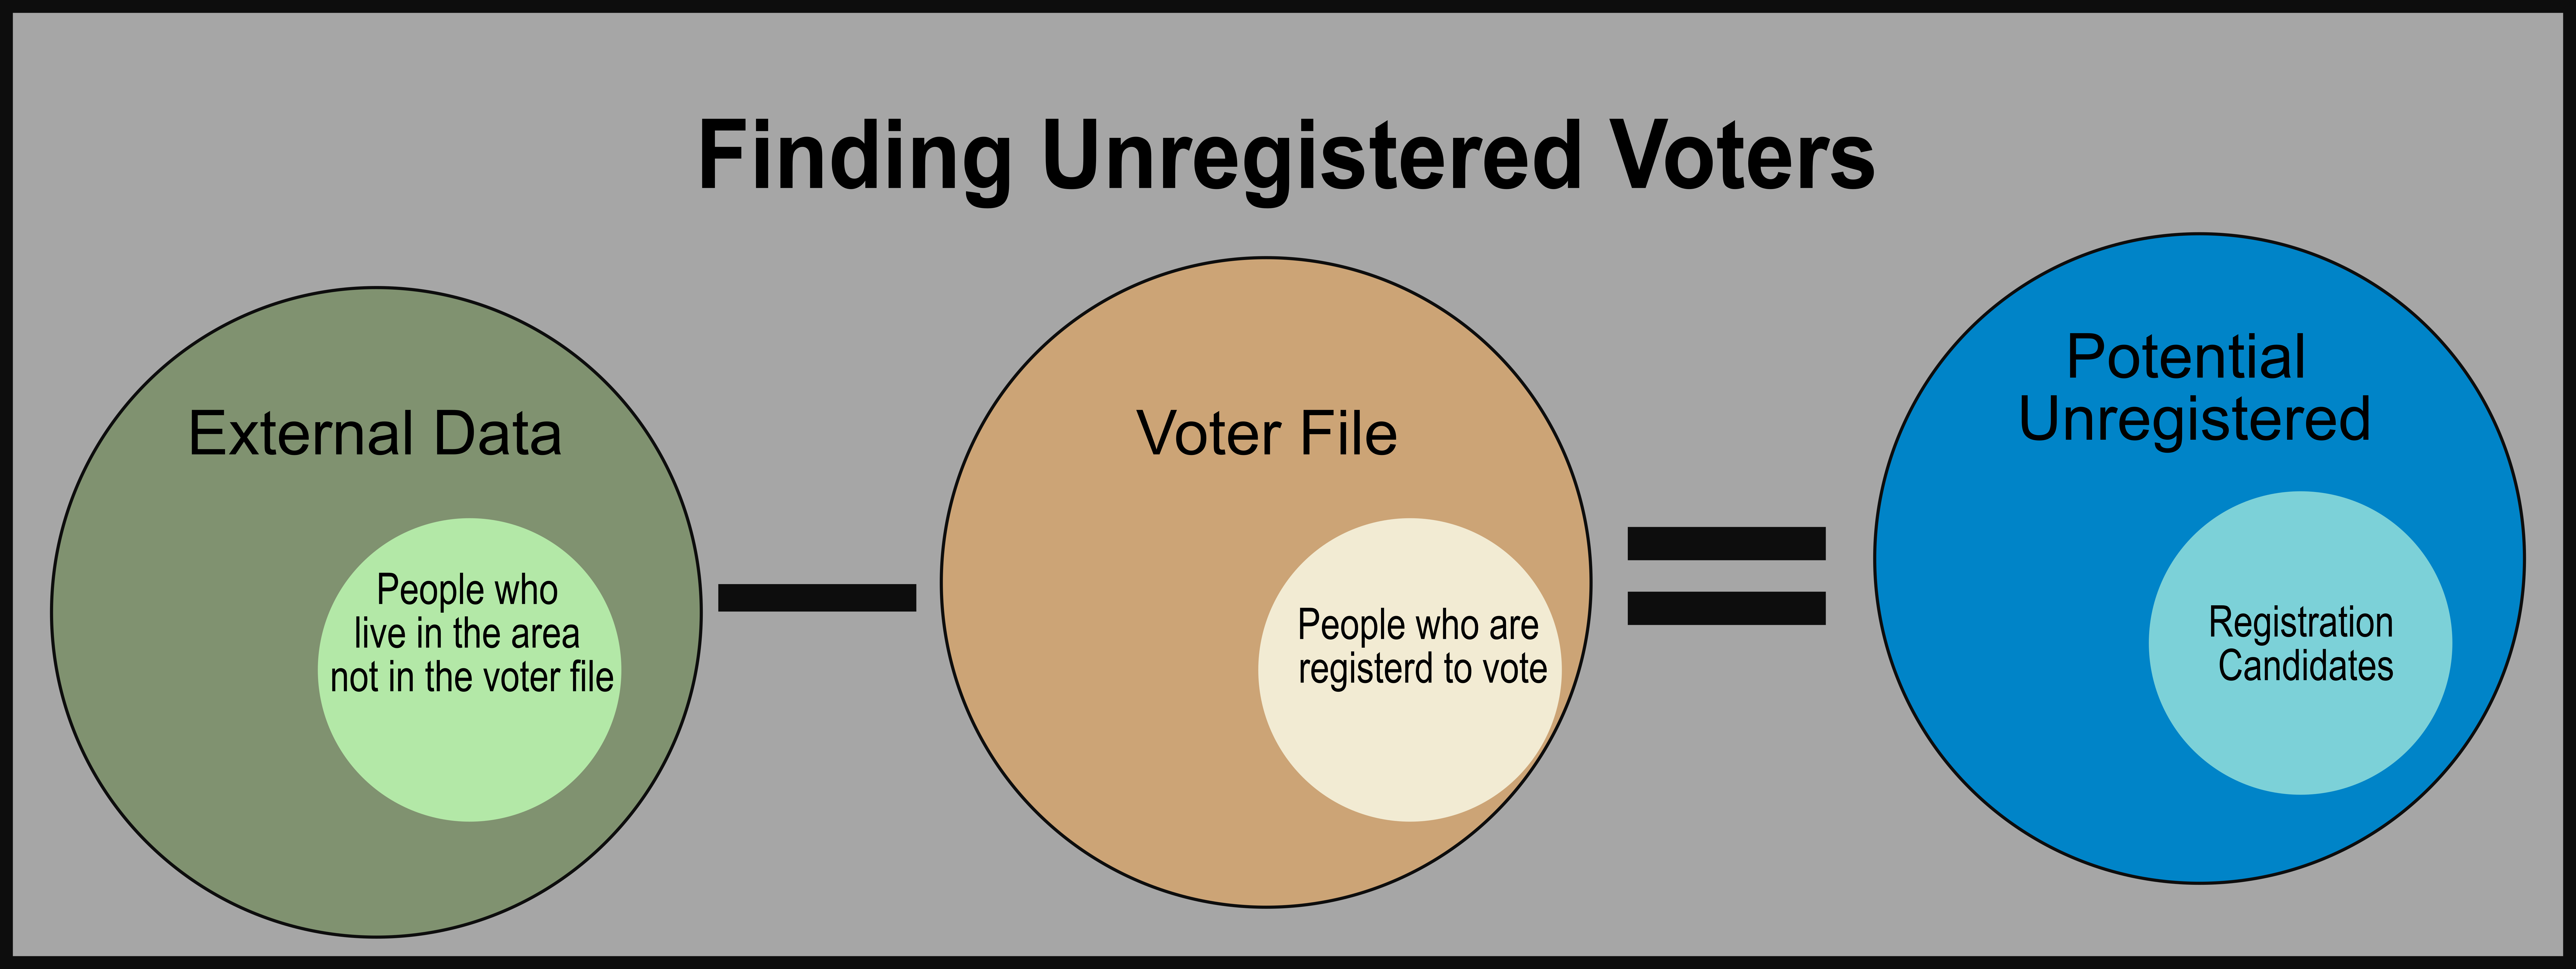 Finding people living in an area but not in the Voter File and registered to vote